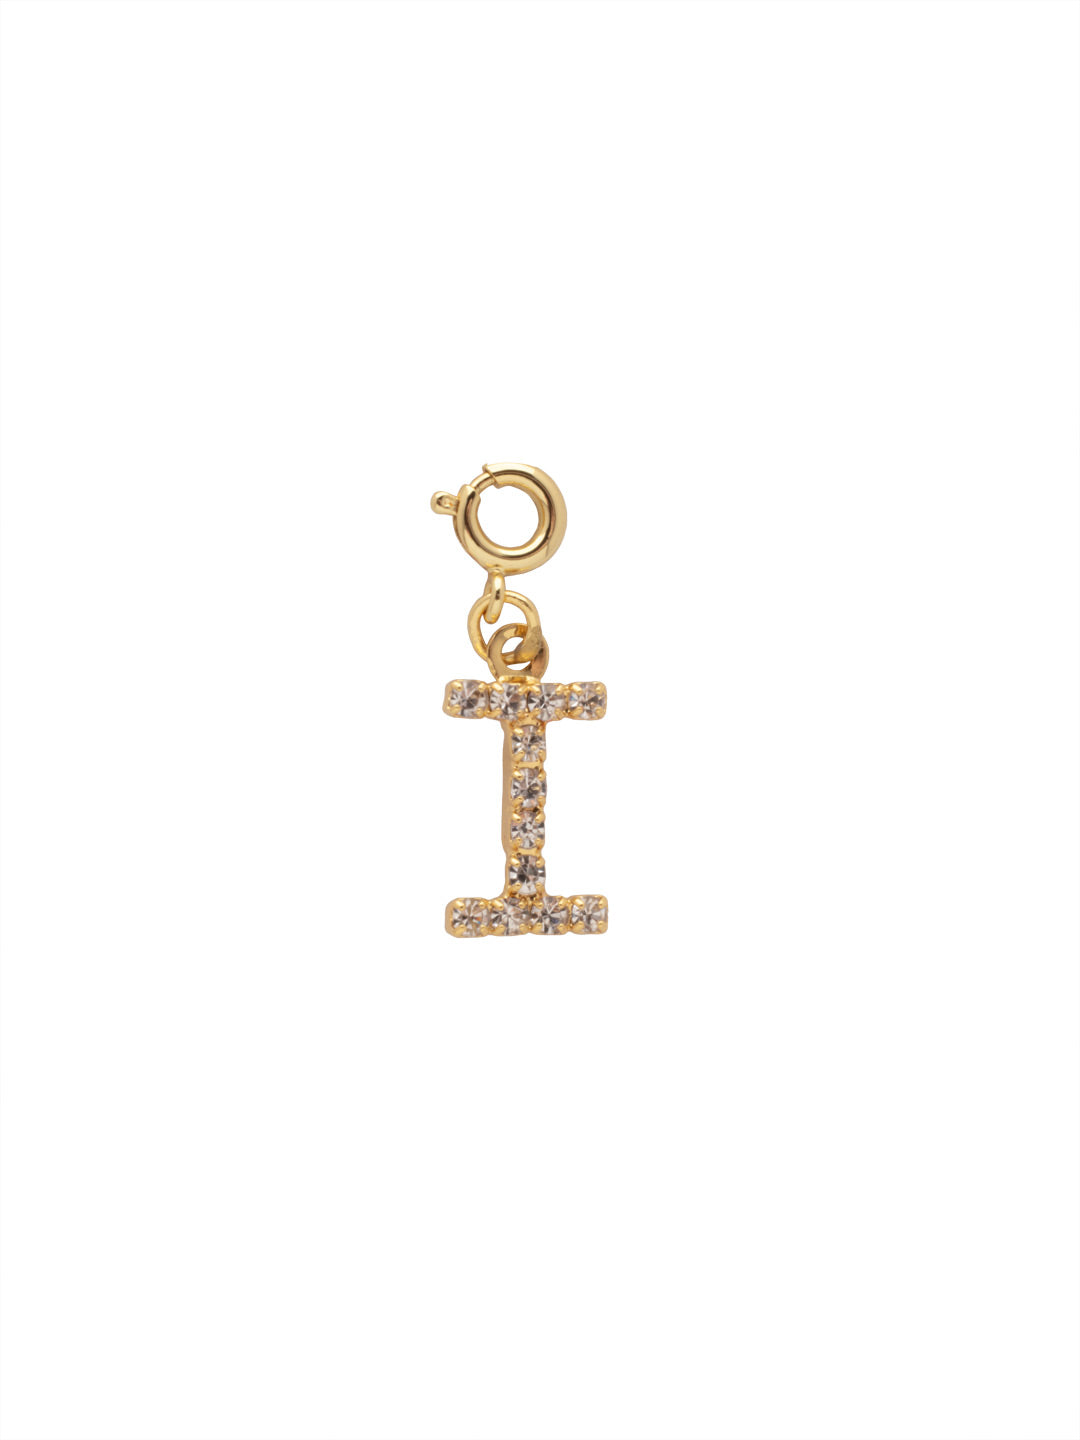 "I" Initial Charm - CFB9BGCRY - <p>The Initial Charm features a metal letter embellished with small round crystals and a small spring ring clasp. From Sorrelli's Crystal collection in our Bright Gold-tone finish.</p>